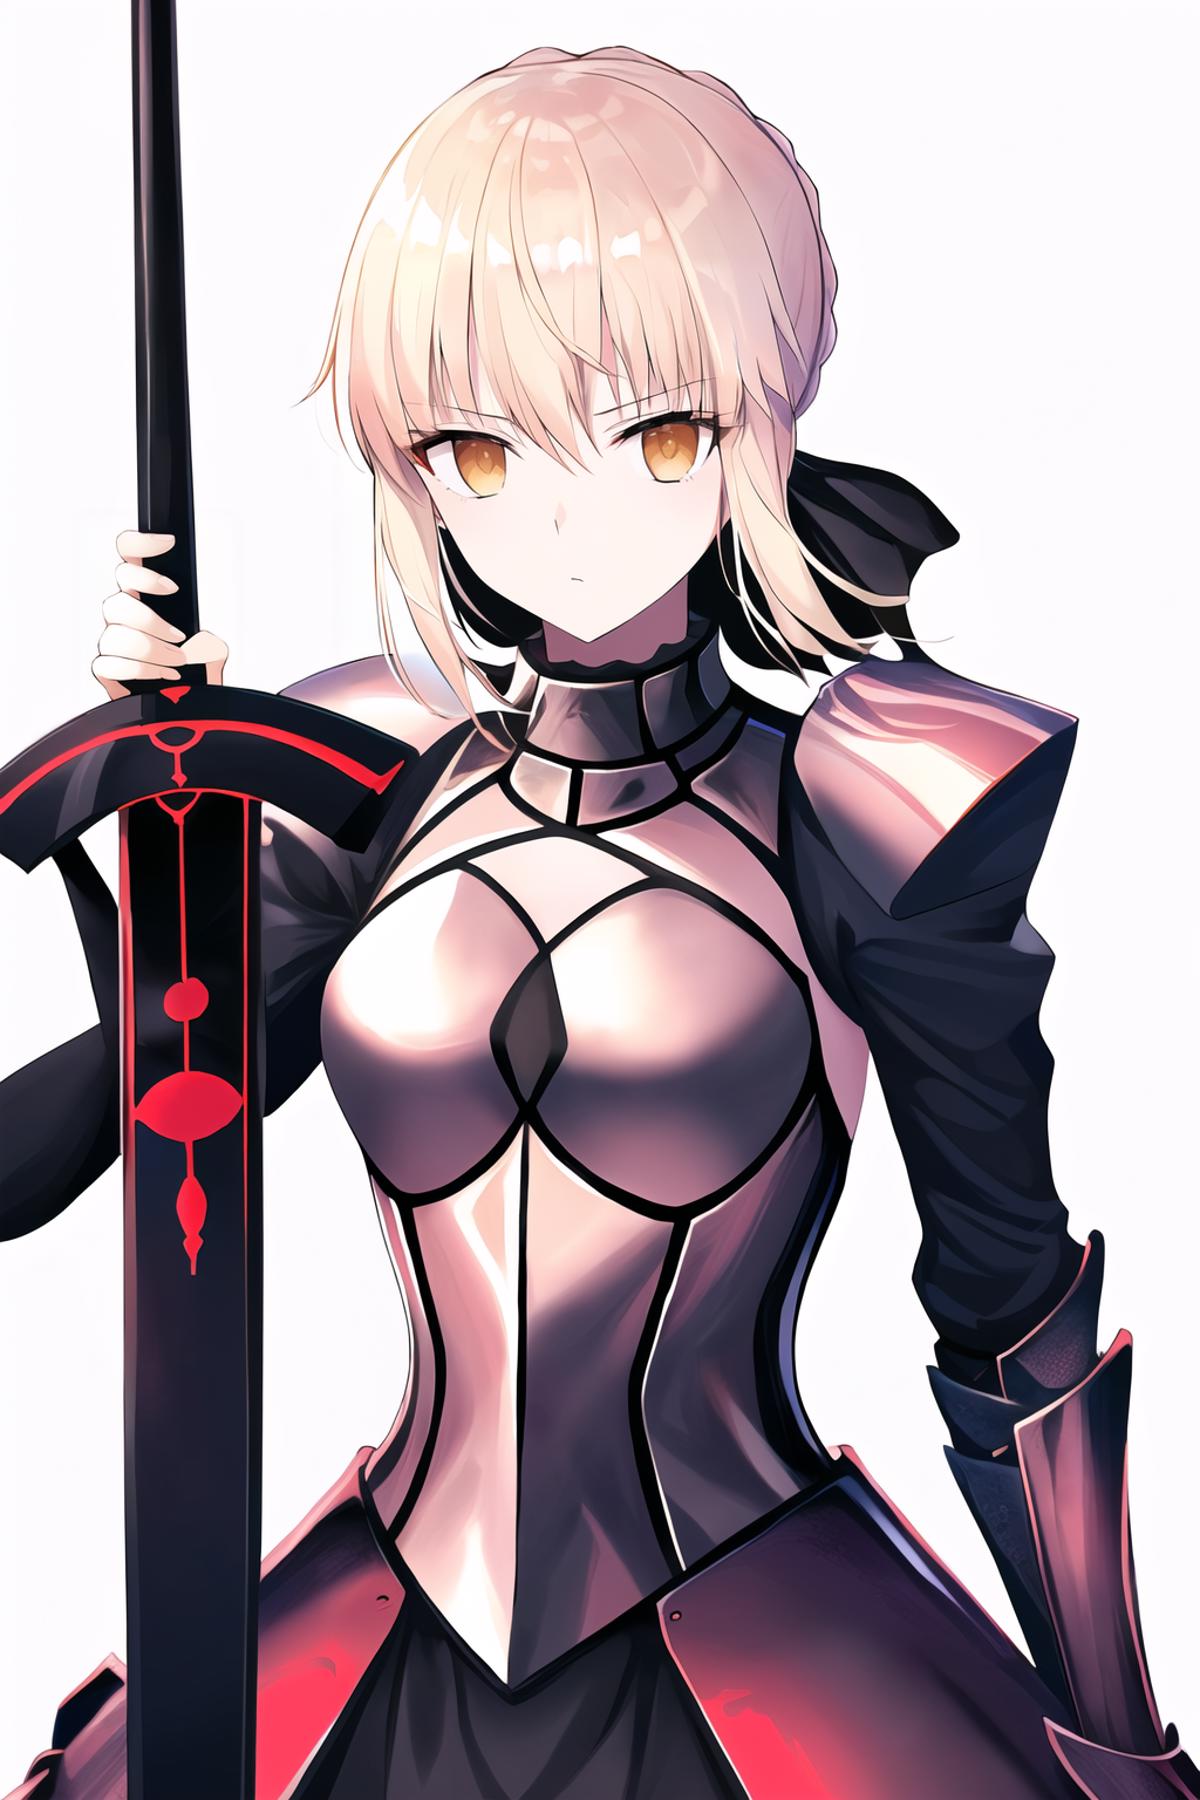 Saber Alter - Fate Series image by orhay1